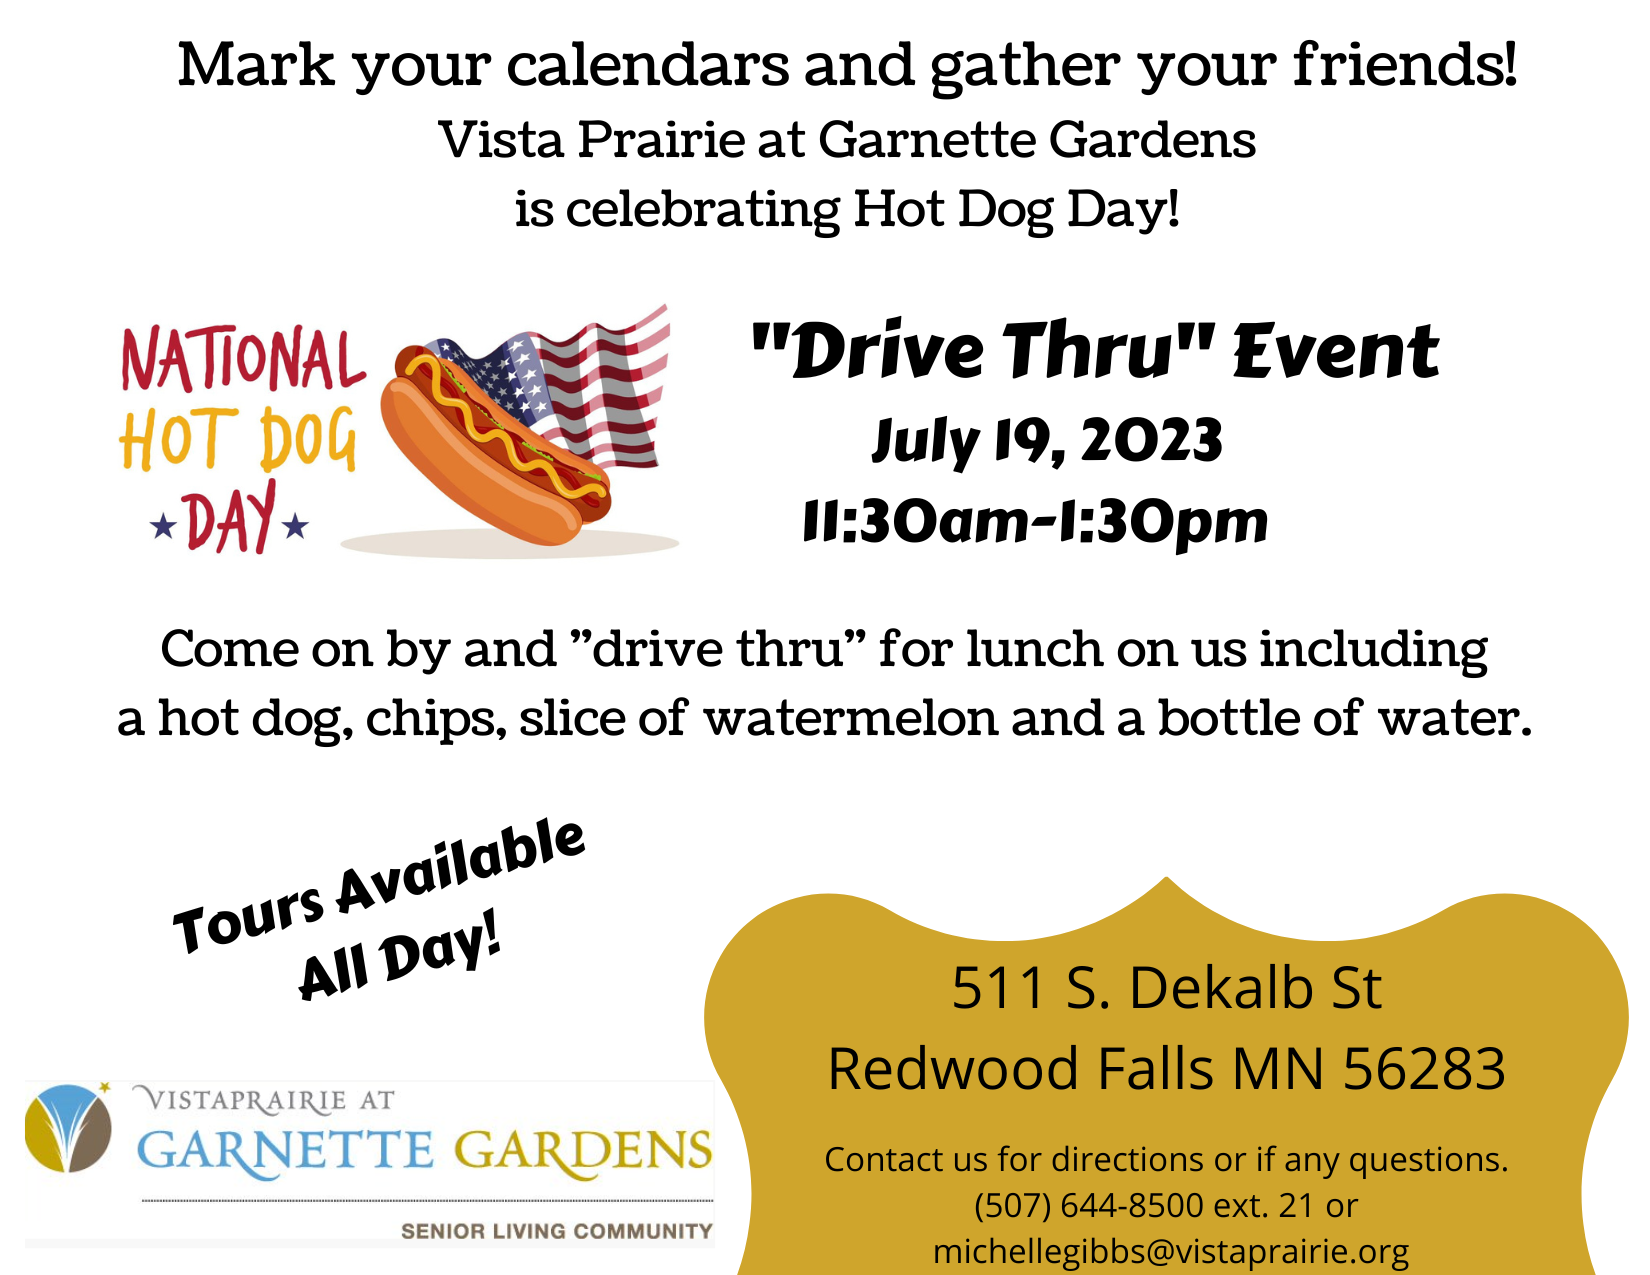 <h1 class="tribe-events-single-event-title">National Hot Dog Day “Drive Thru” Event</h1>